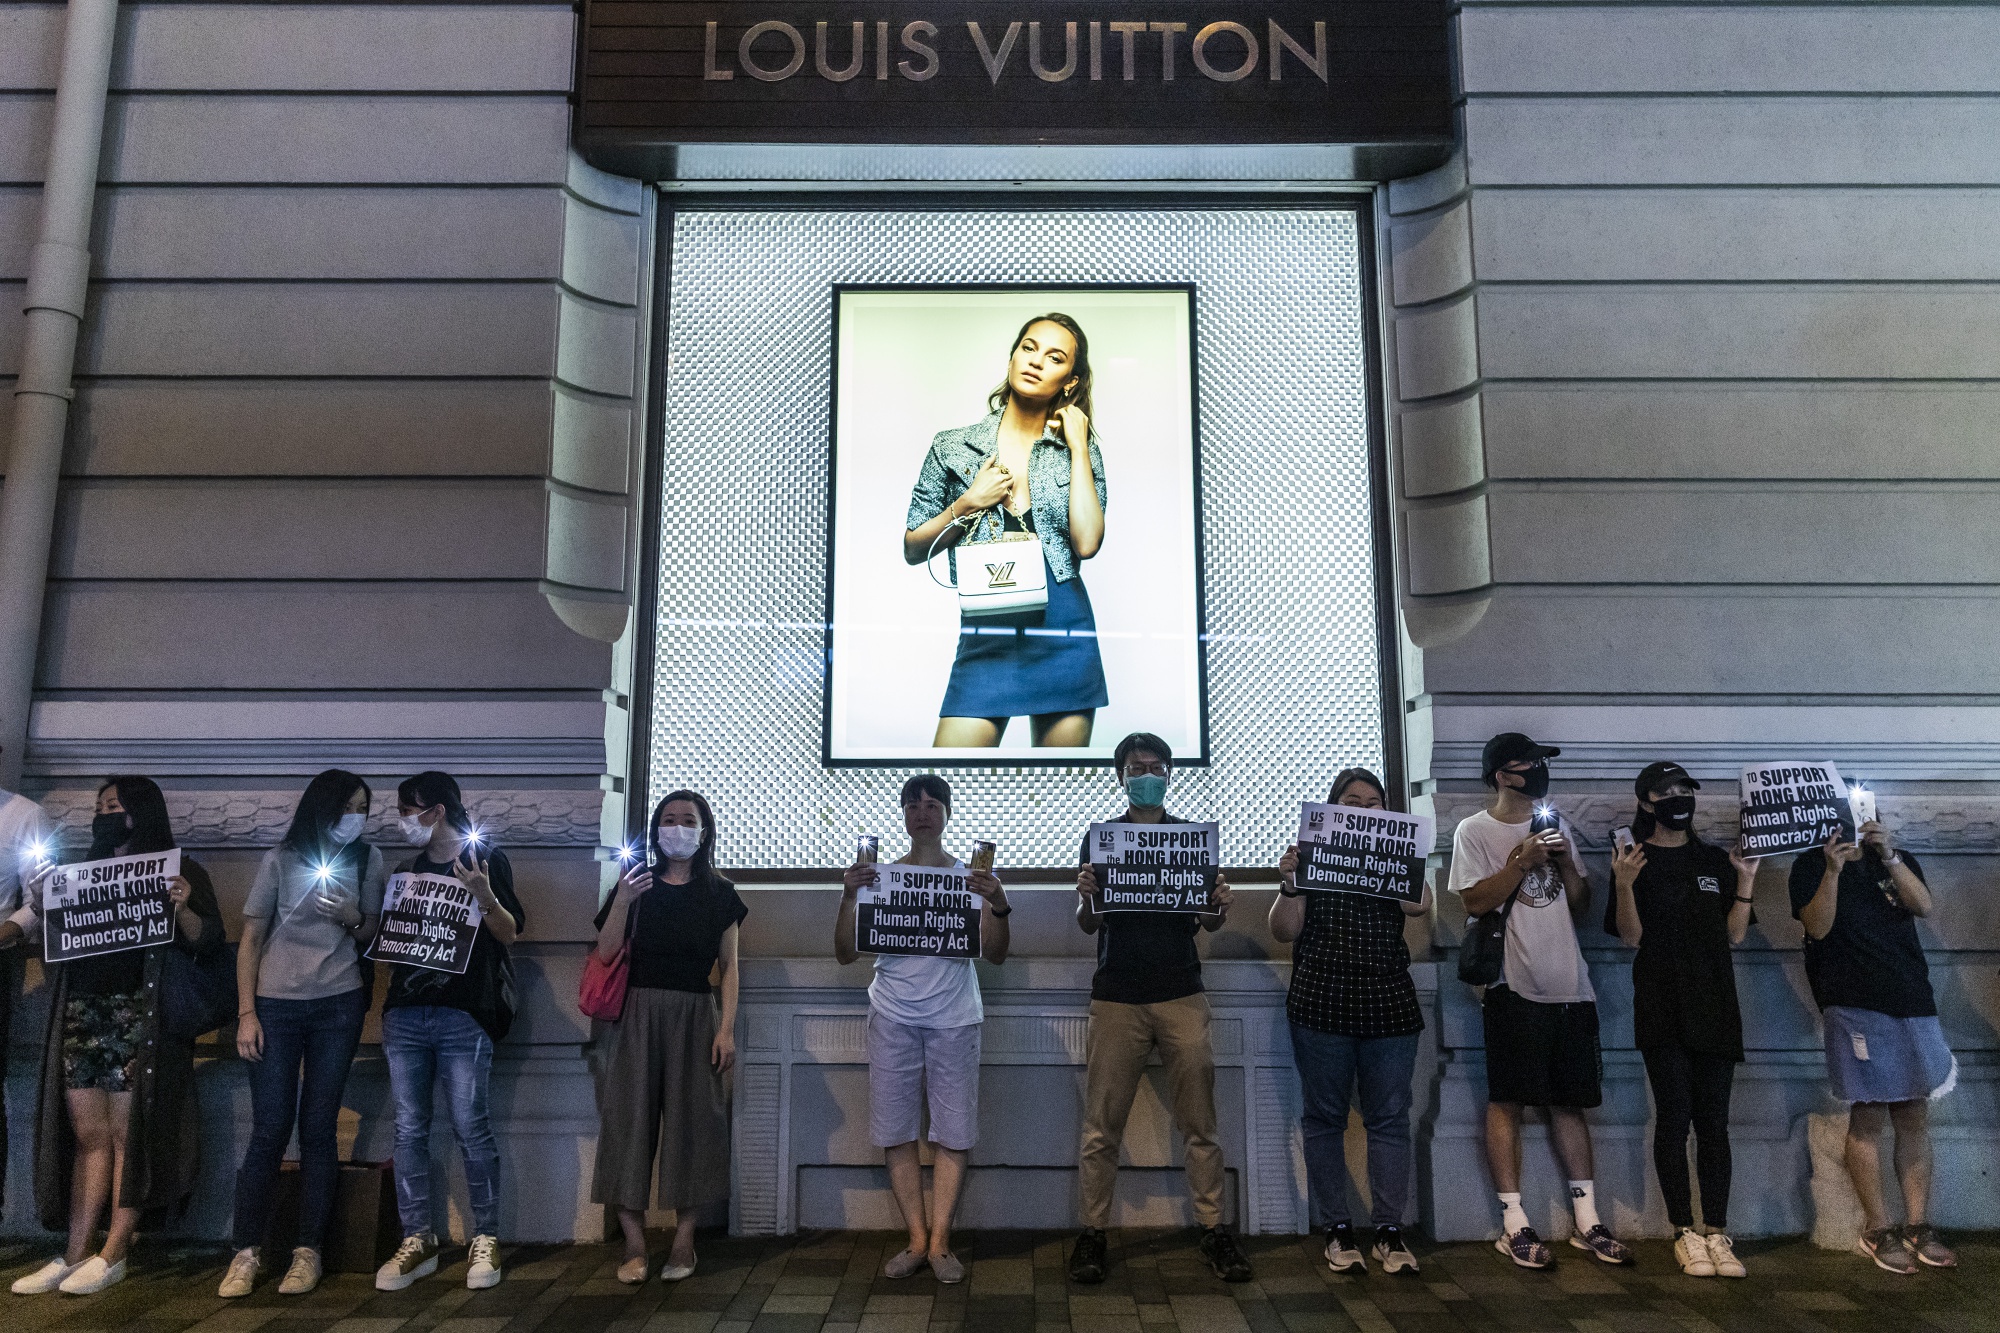 LVMH Share Price Rises to Record as Chinese Consumers Drive Sales Surge -  Bloomberg